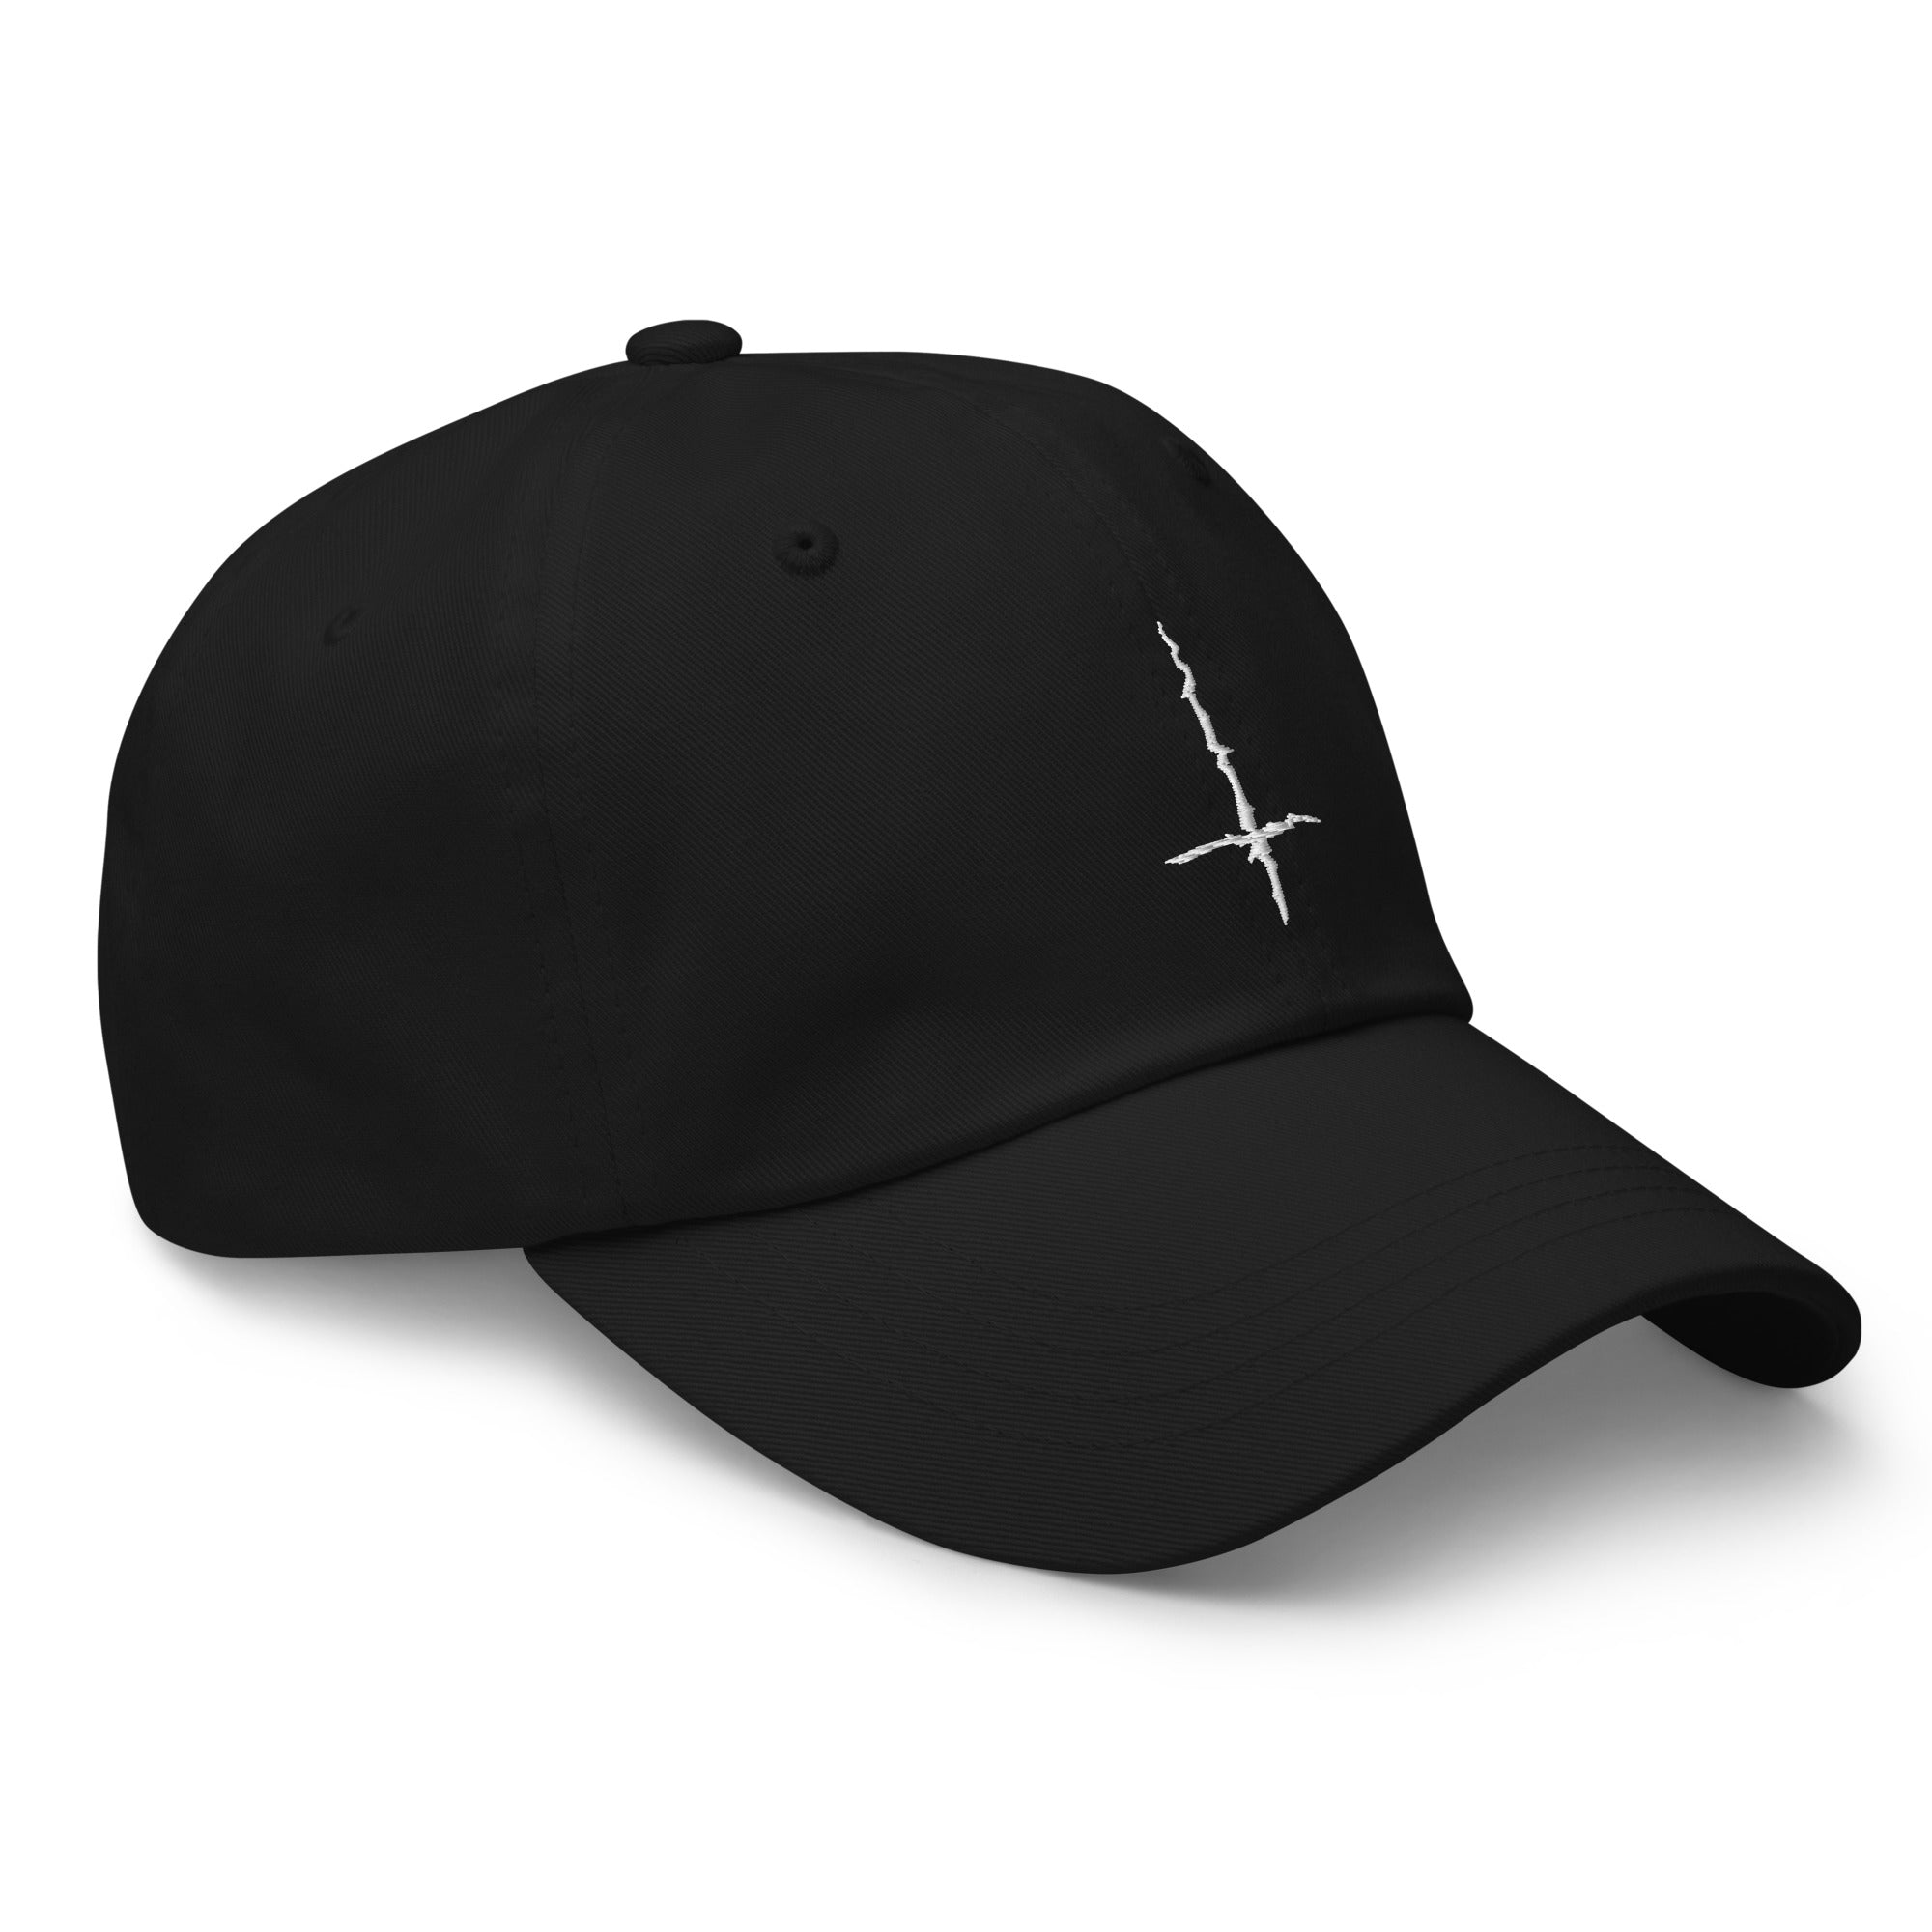 Black Metal Style Inverted Cross Embroidered Baseball Cap White Thread Dad hat - Edge of Life Designs